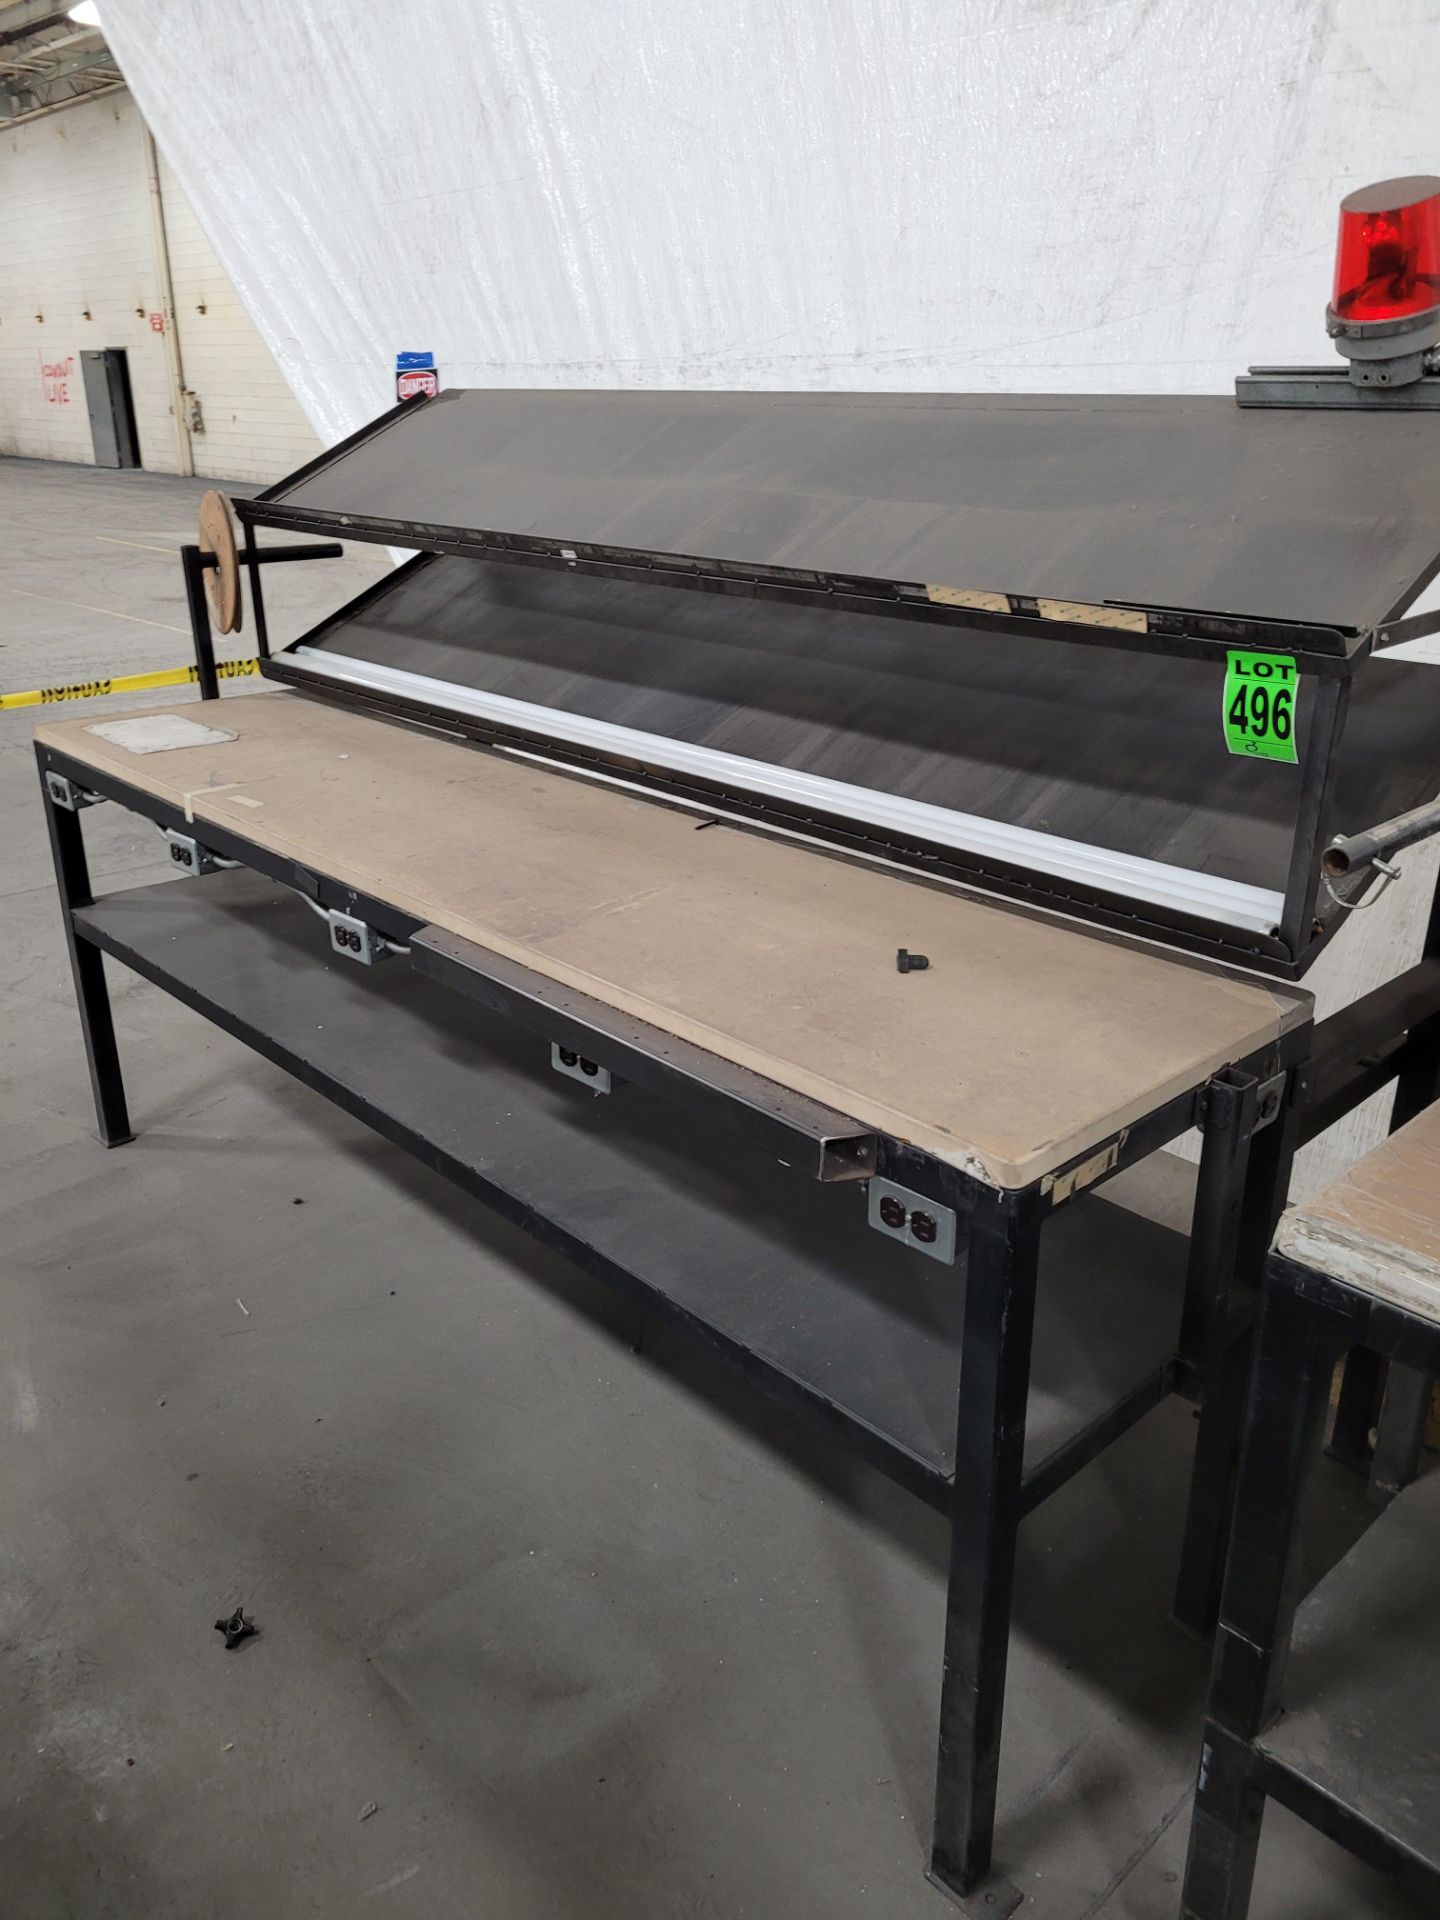 Steel frame 2-level inspection table with wood surface, 2 inclined backboard shelves, warning light